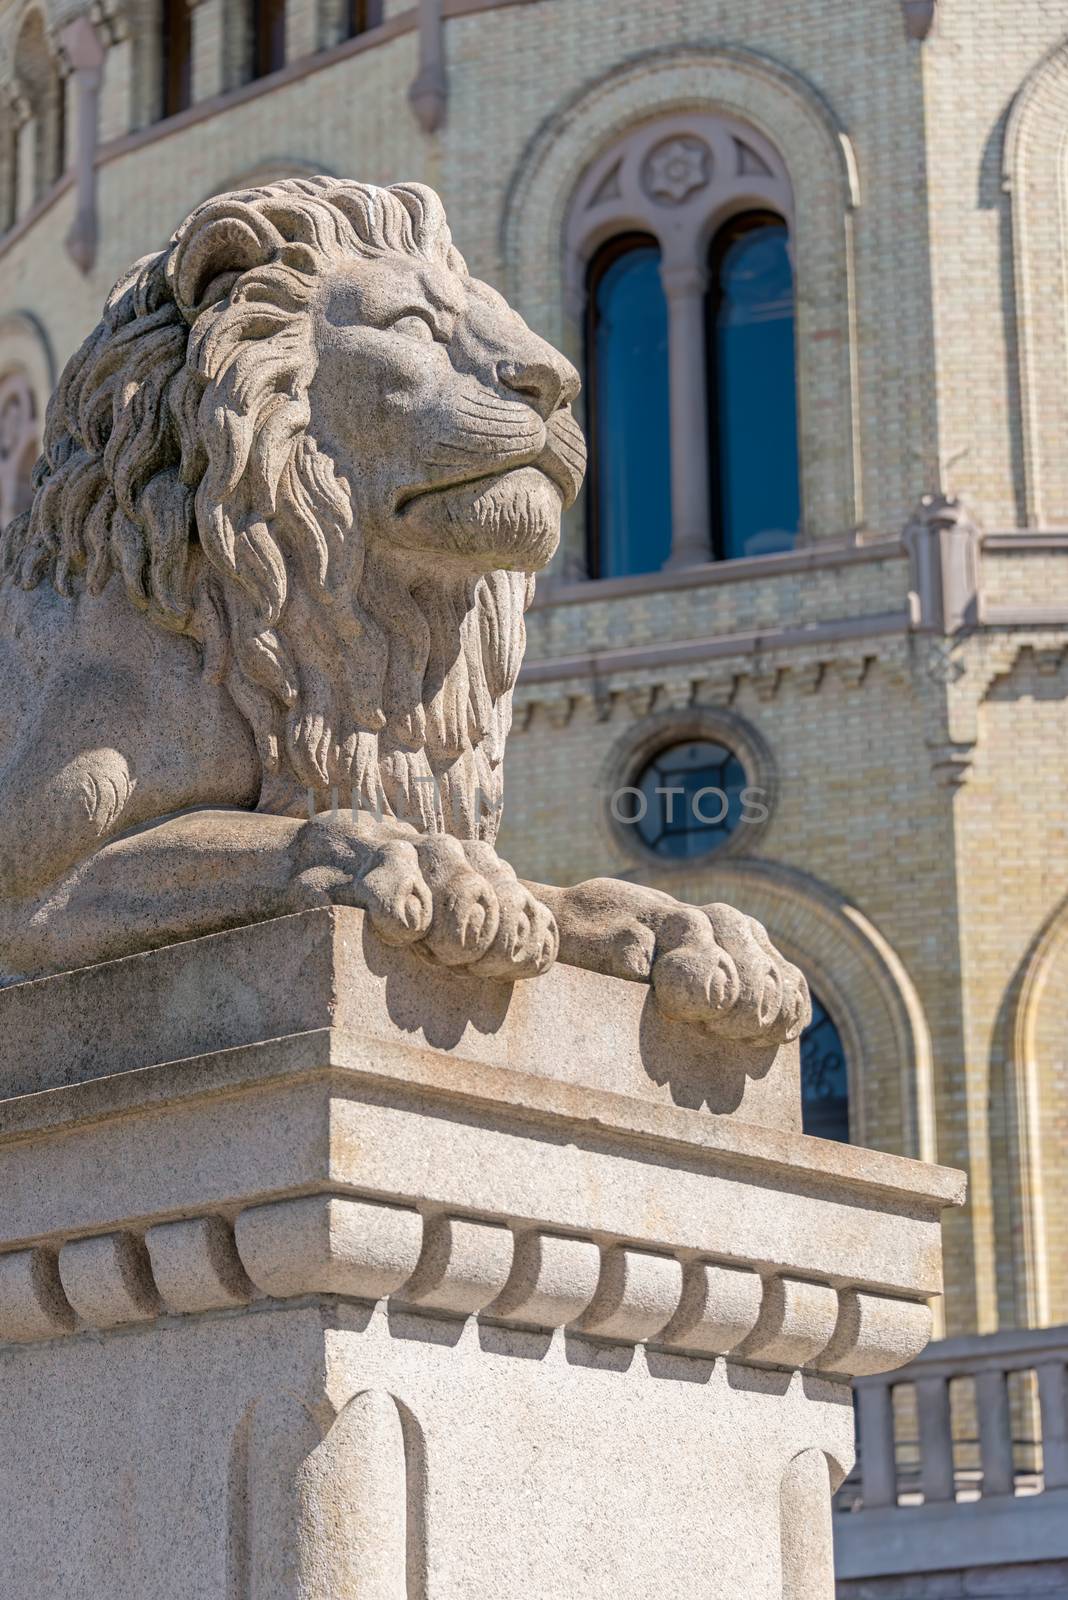 Exterior of the Parliament of Norway in Oslo, Norway. Lion is symbol of power